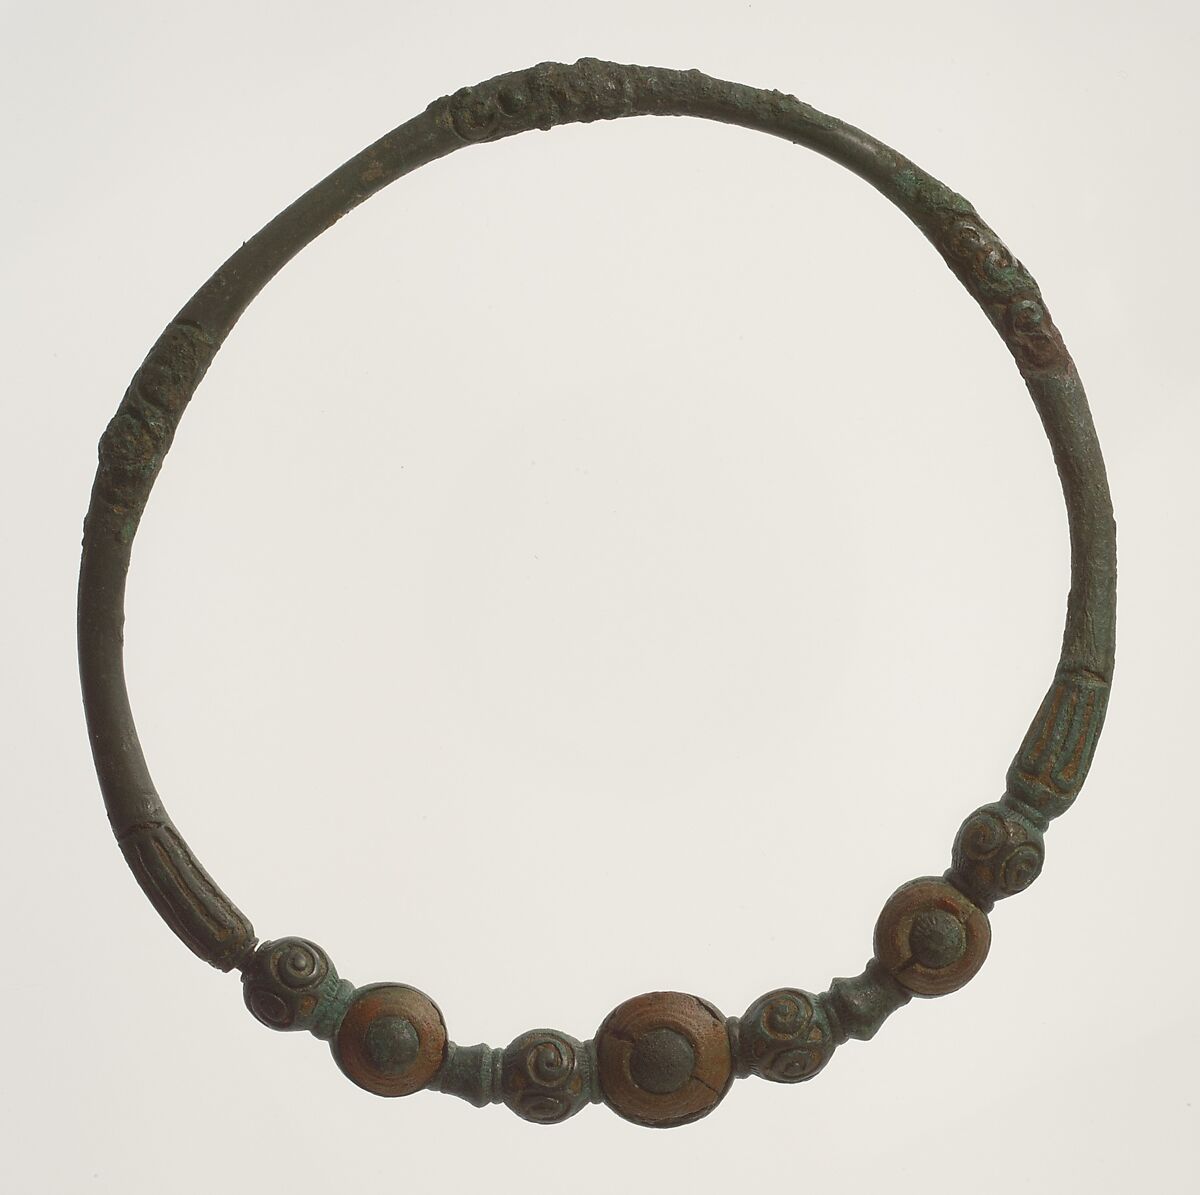 Neck Ring, Copper alloy with remains of glass paste inlays, Celtic 